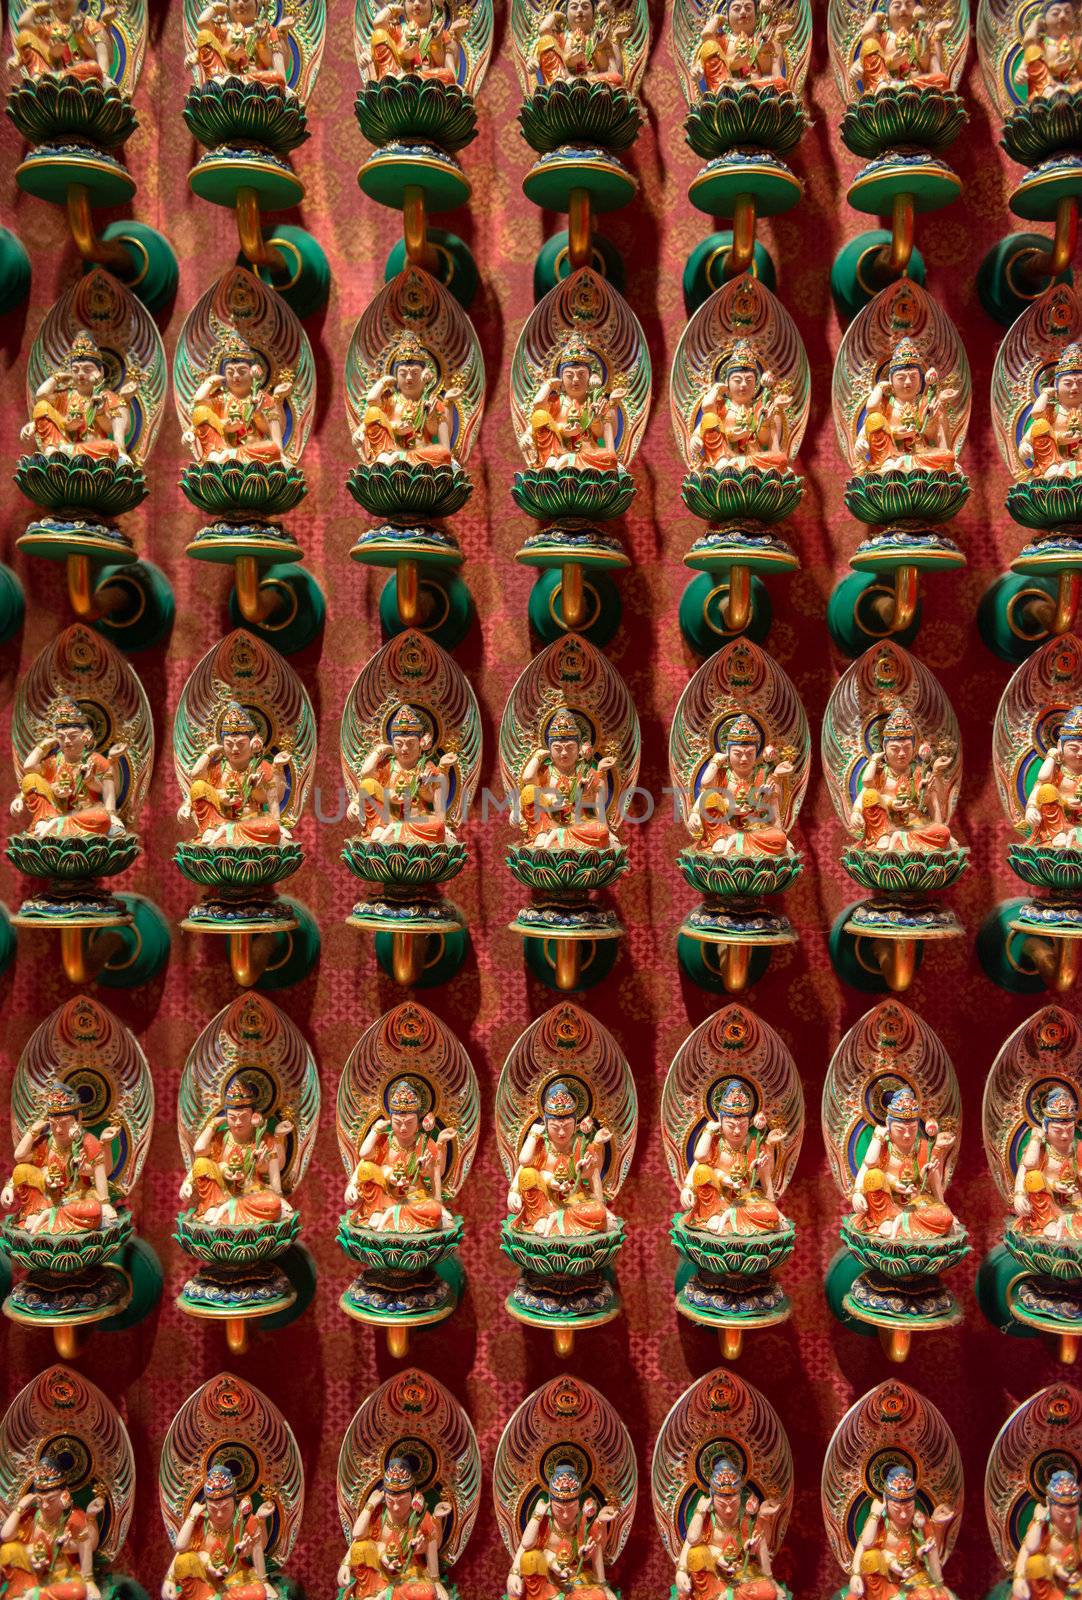 Many small Buddhist statues on lotus flowers with red wall on background. Selective focus on front.